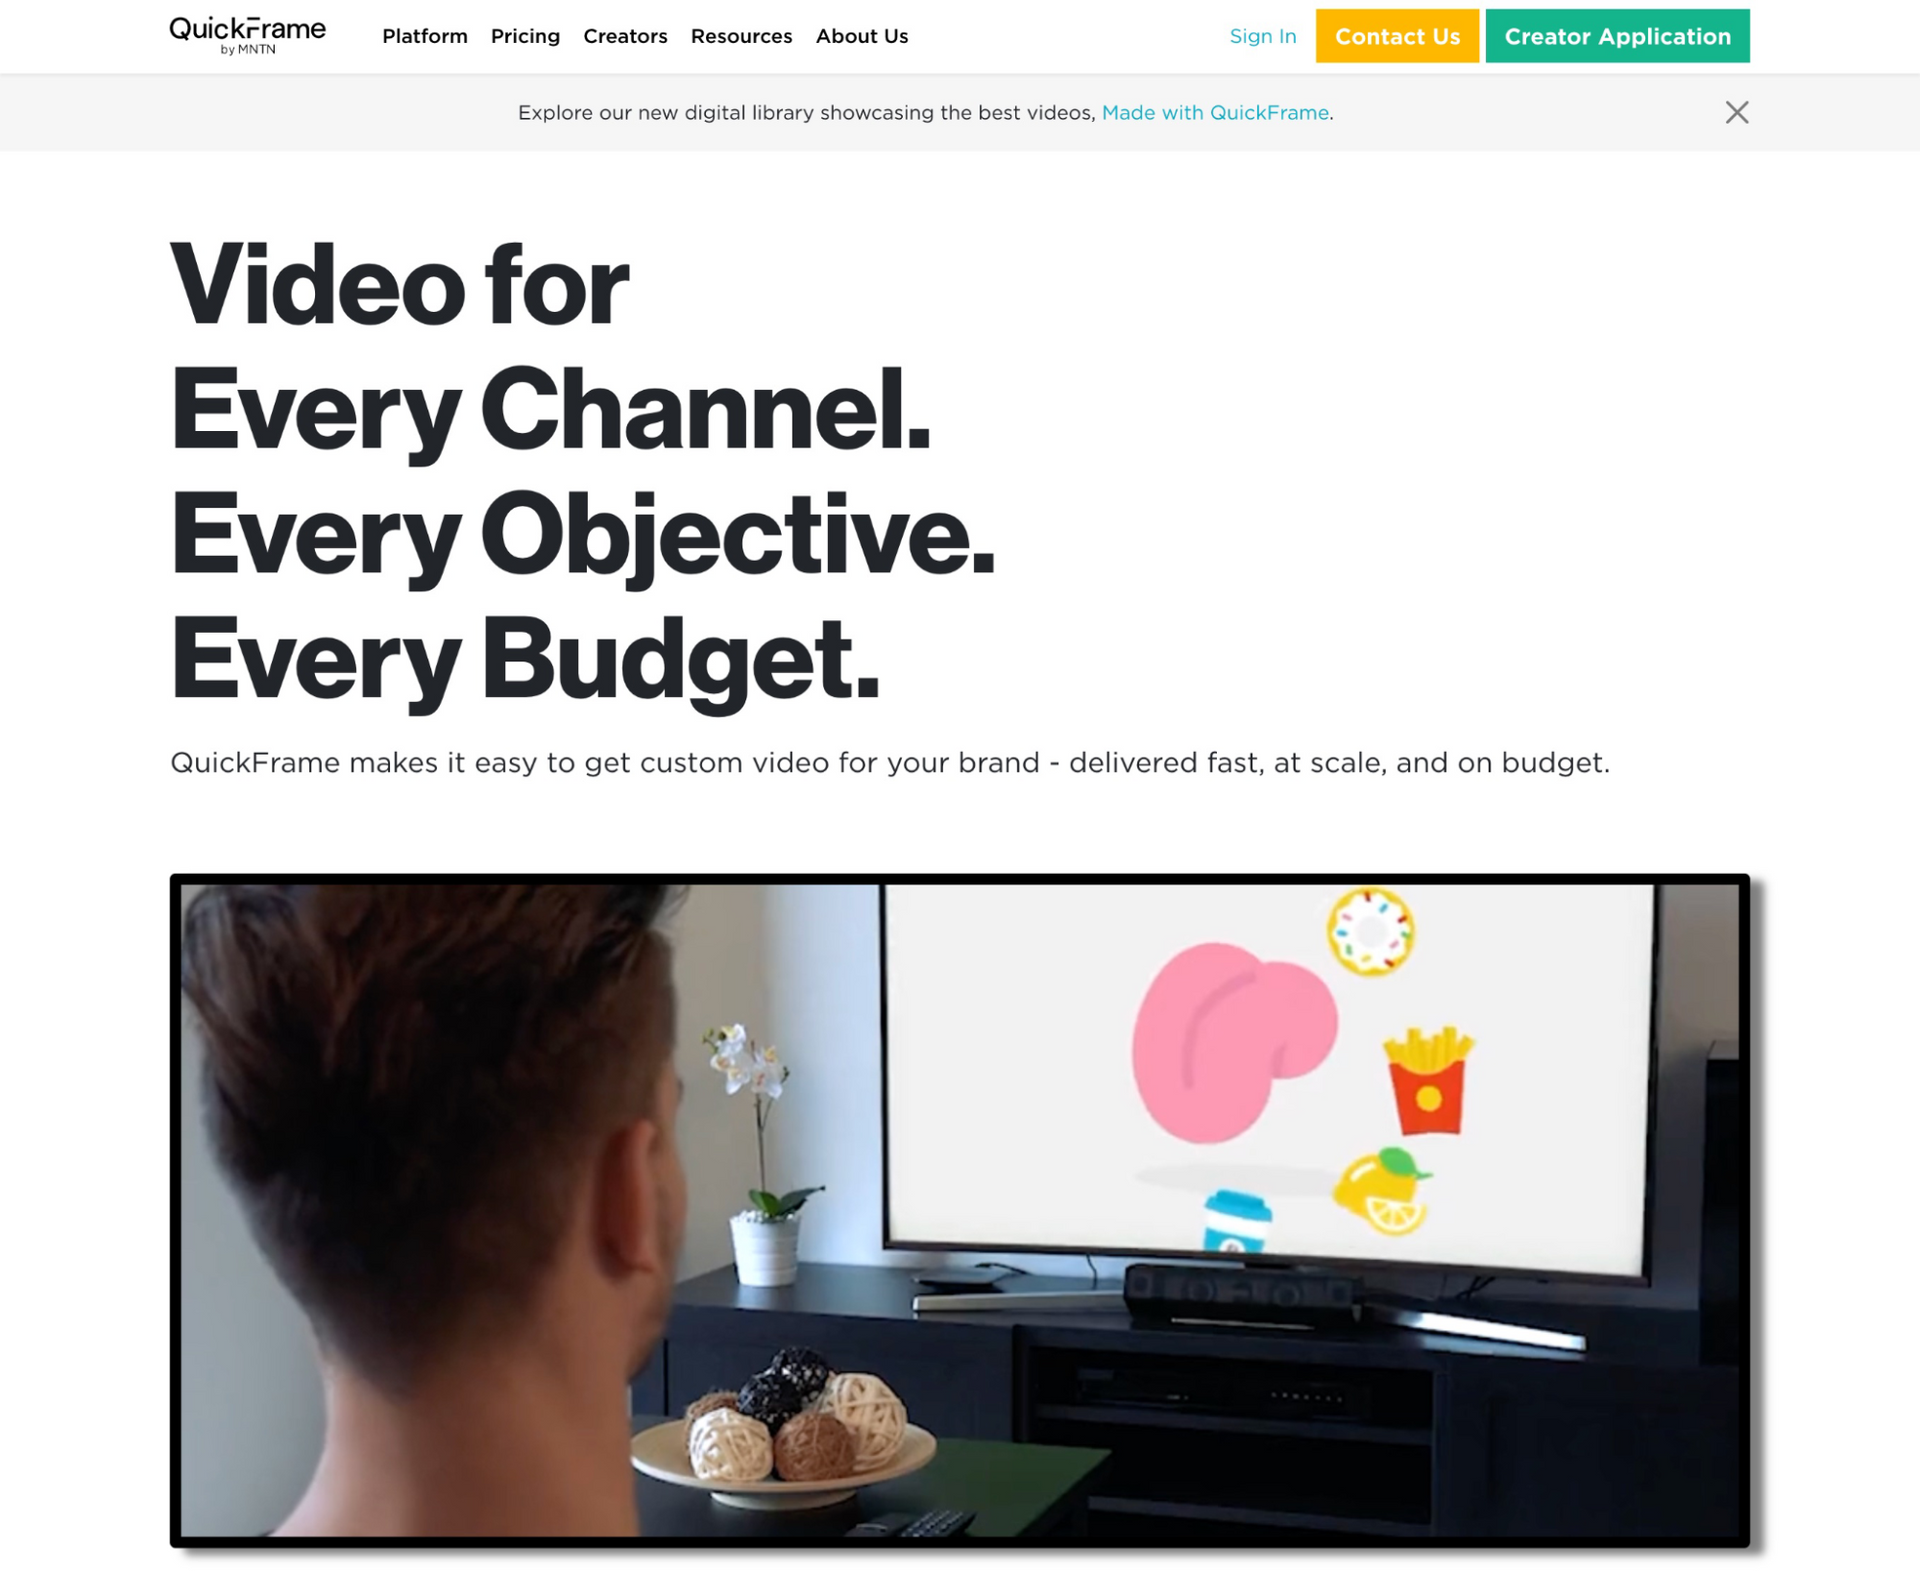 Quickframe: Video for every channel, objective and budget